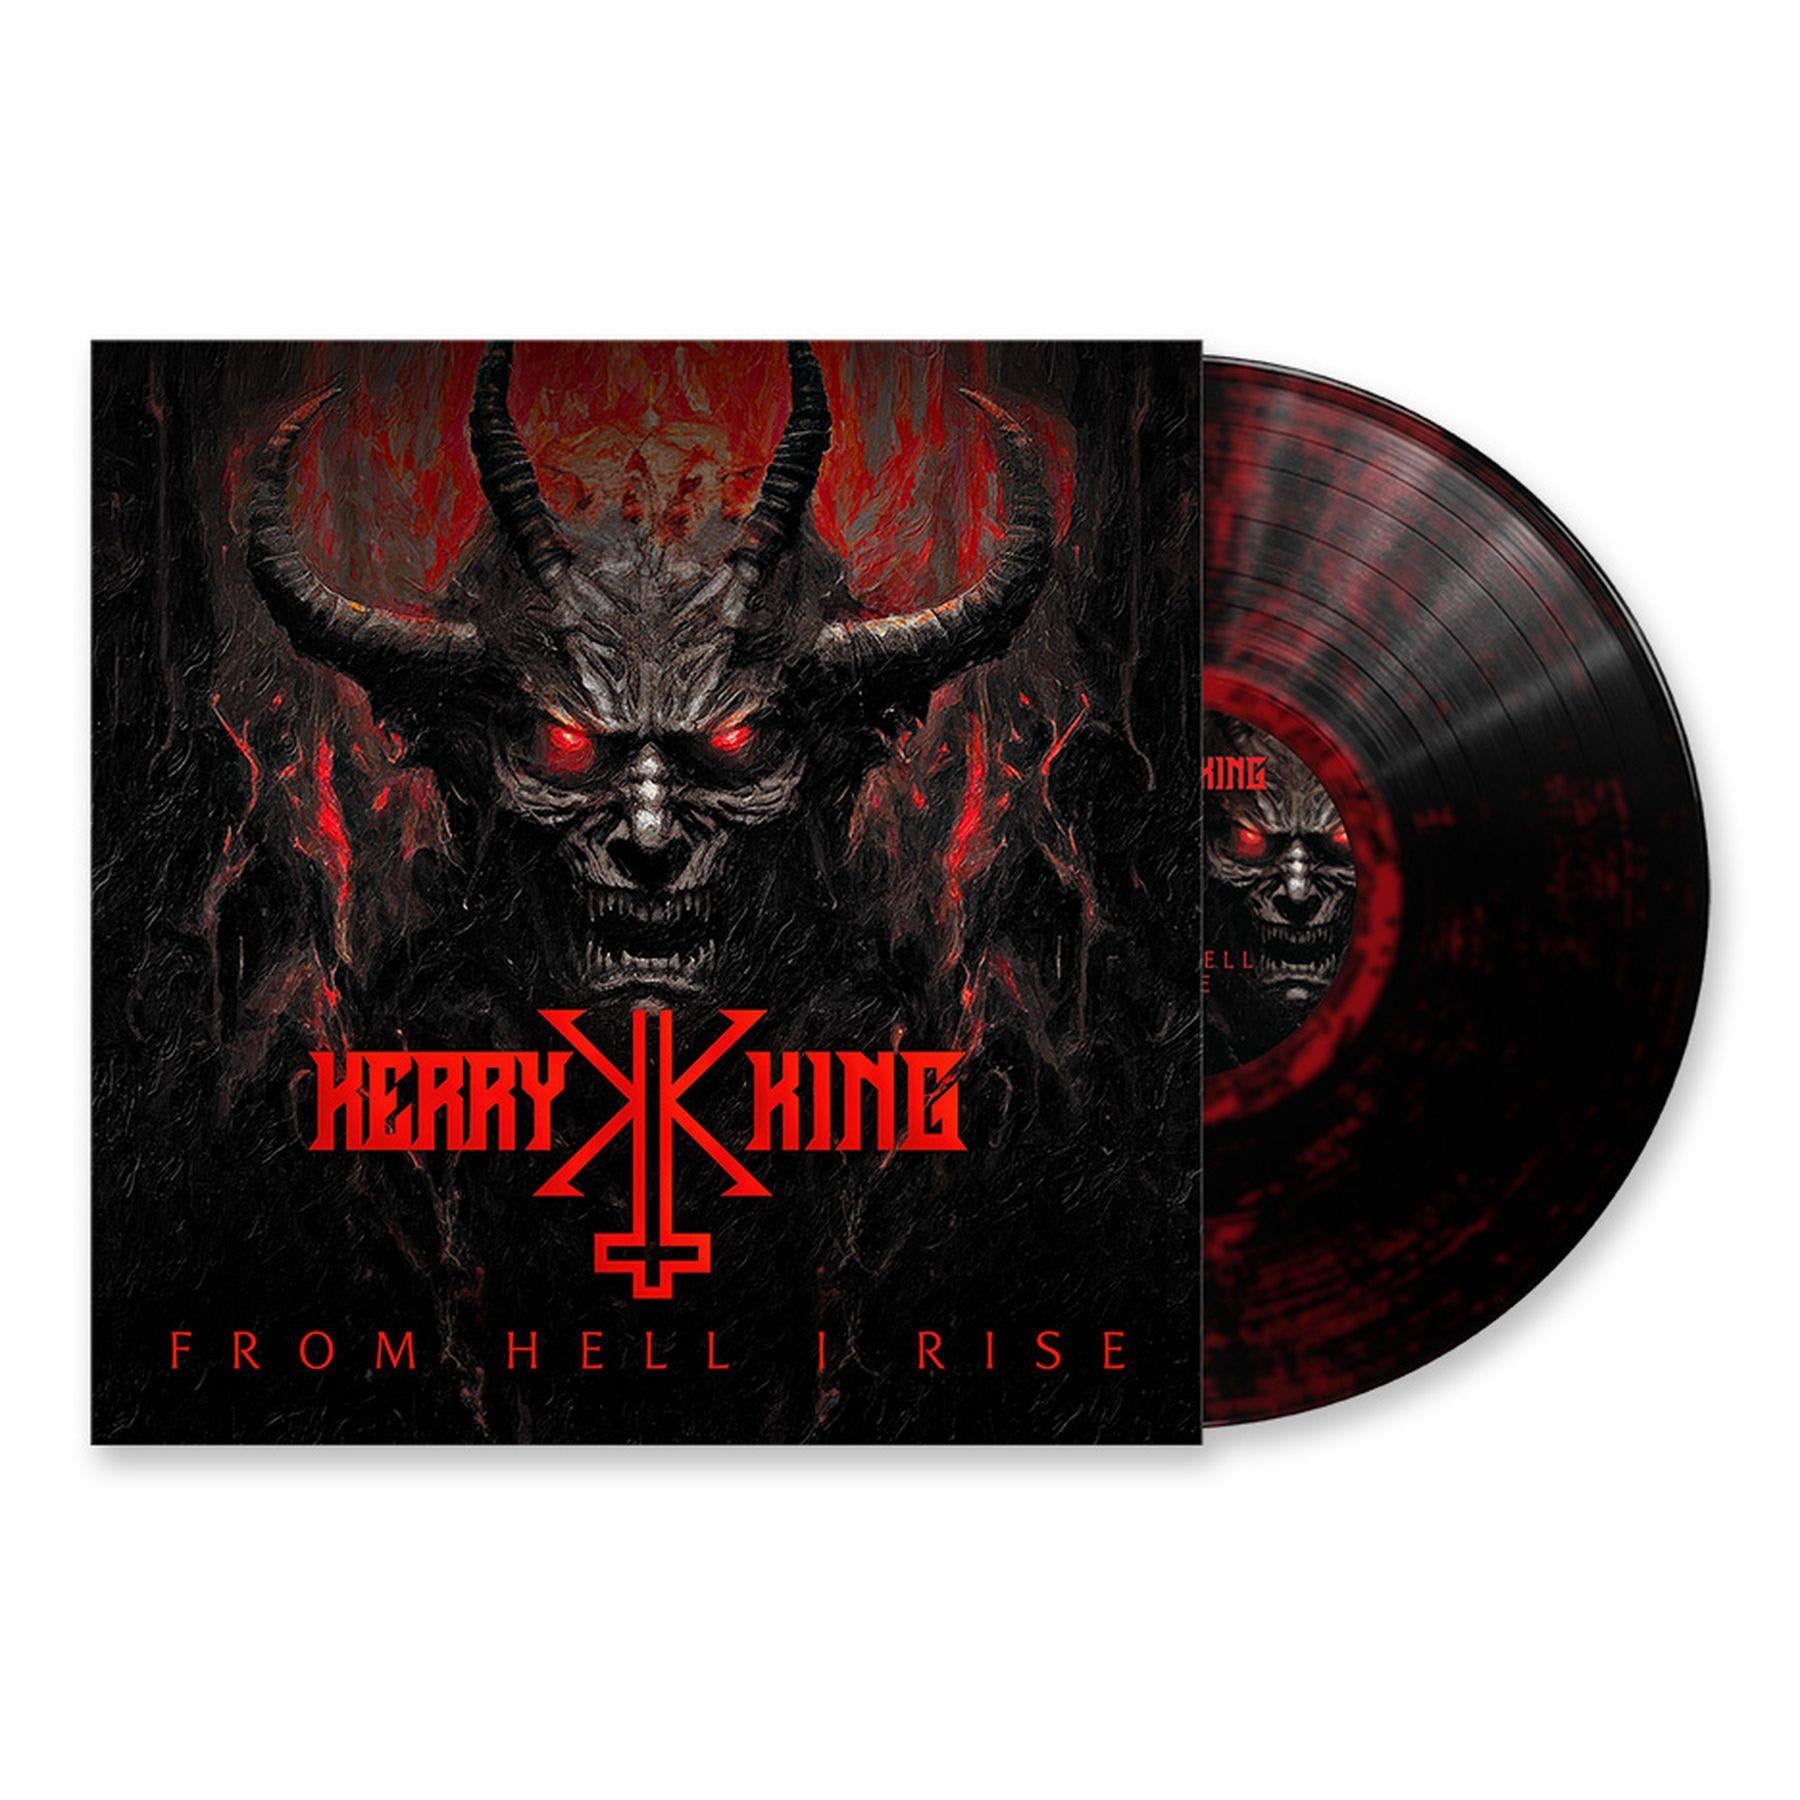 from hell i rise (black / dark red marble vinyl)